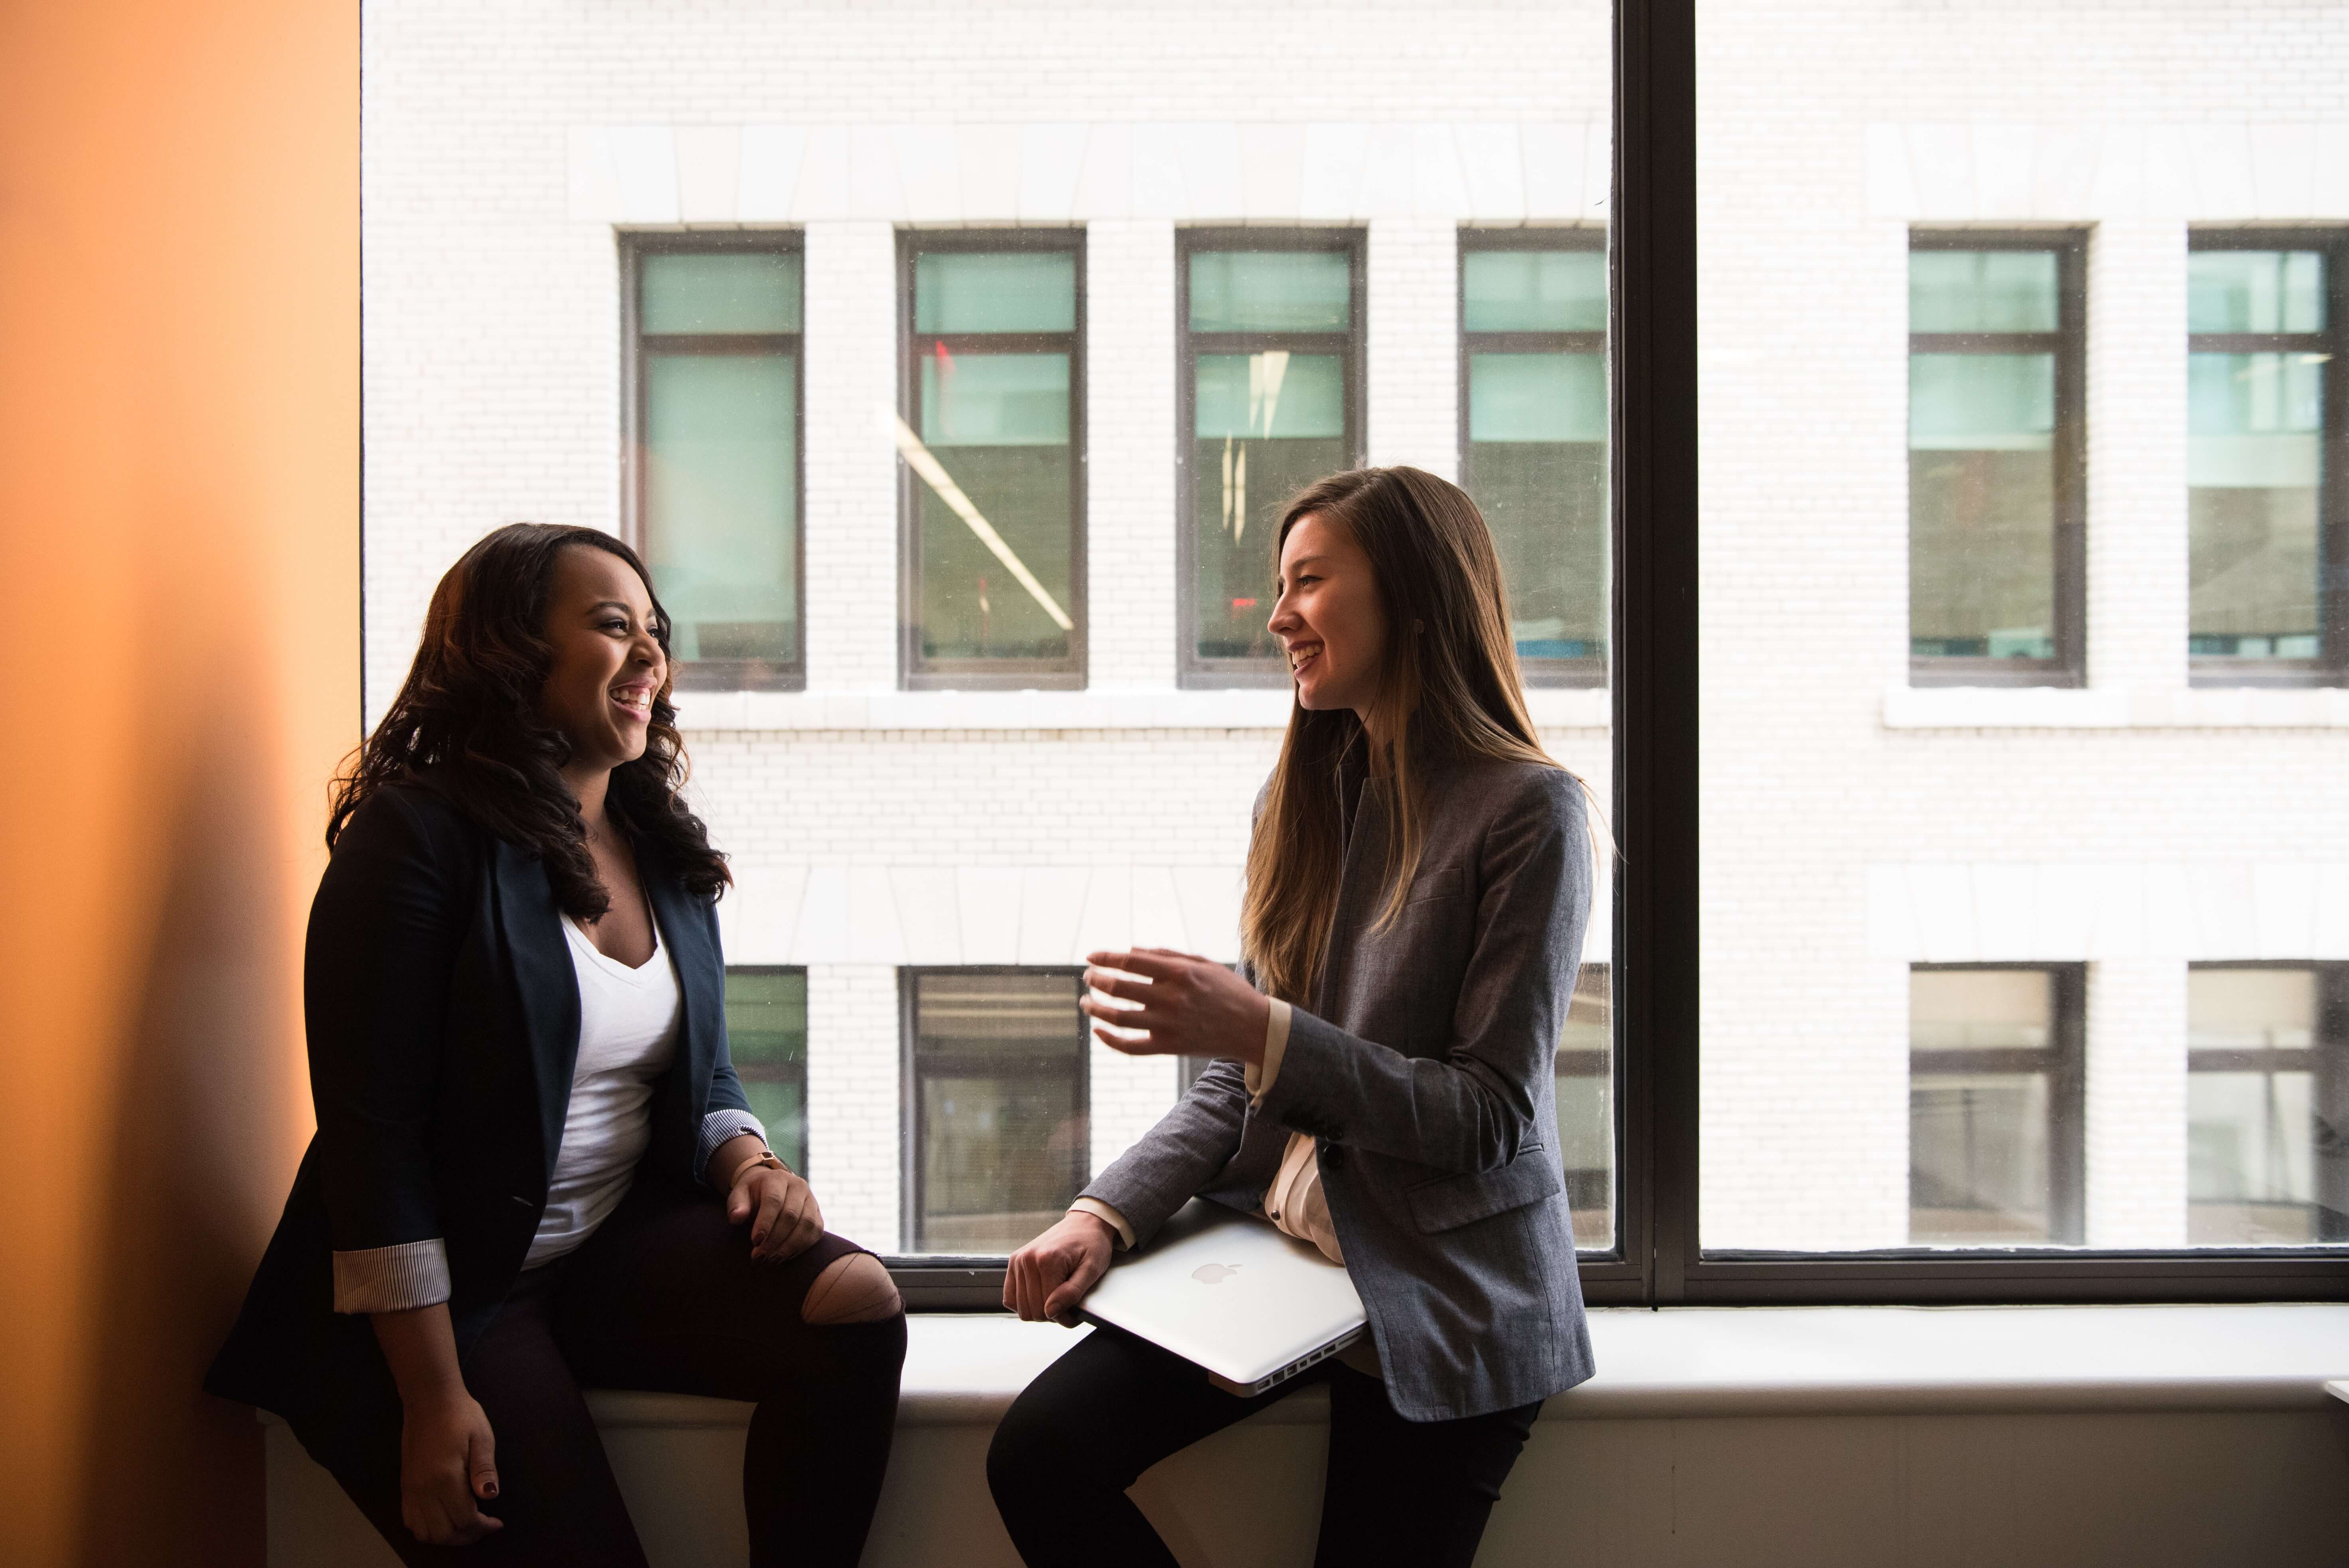 A black woman and a white woman, both in business casual clothing, sitting on a windowsill and having a conversation